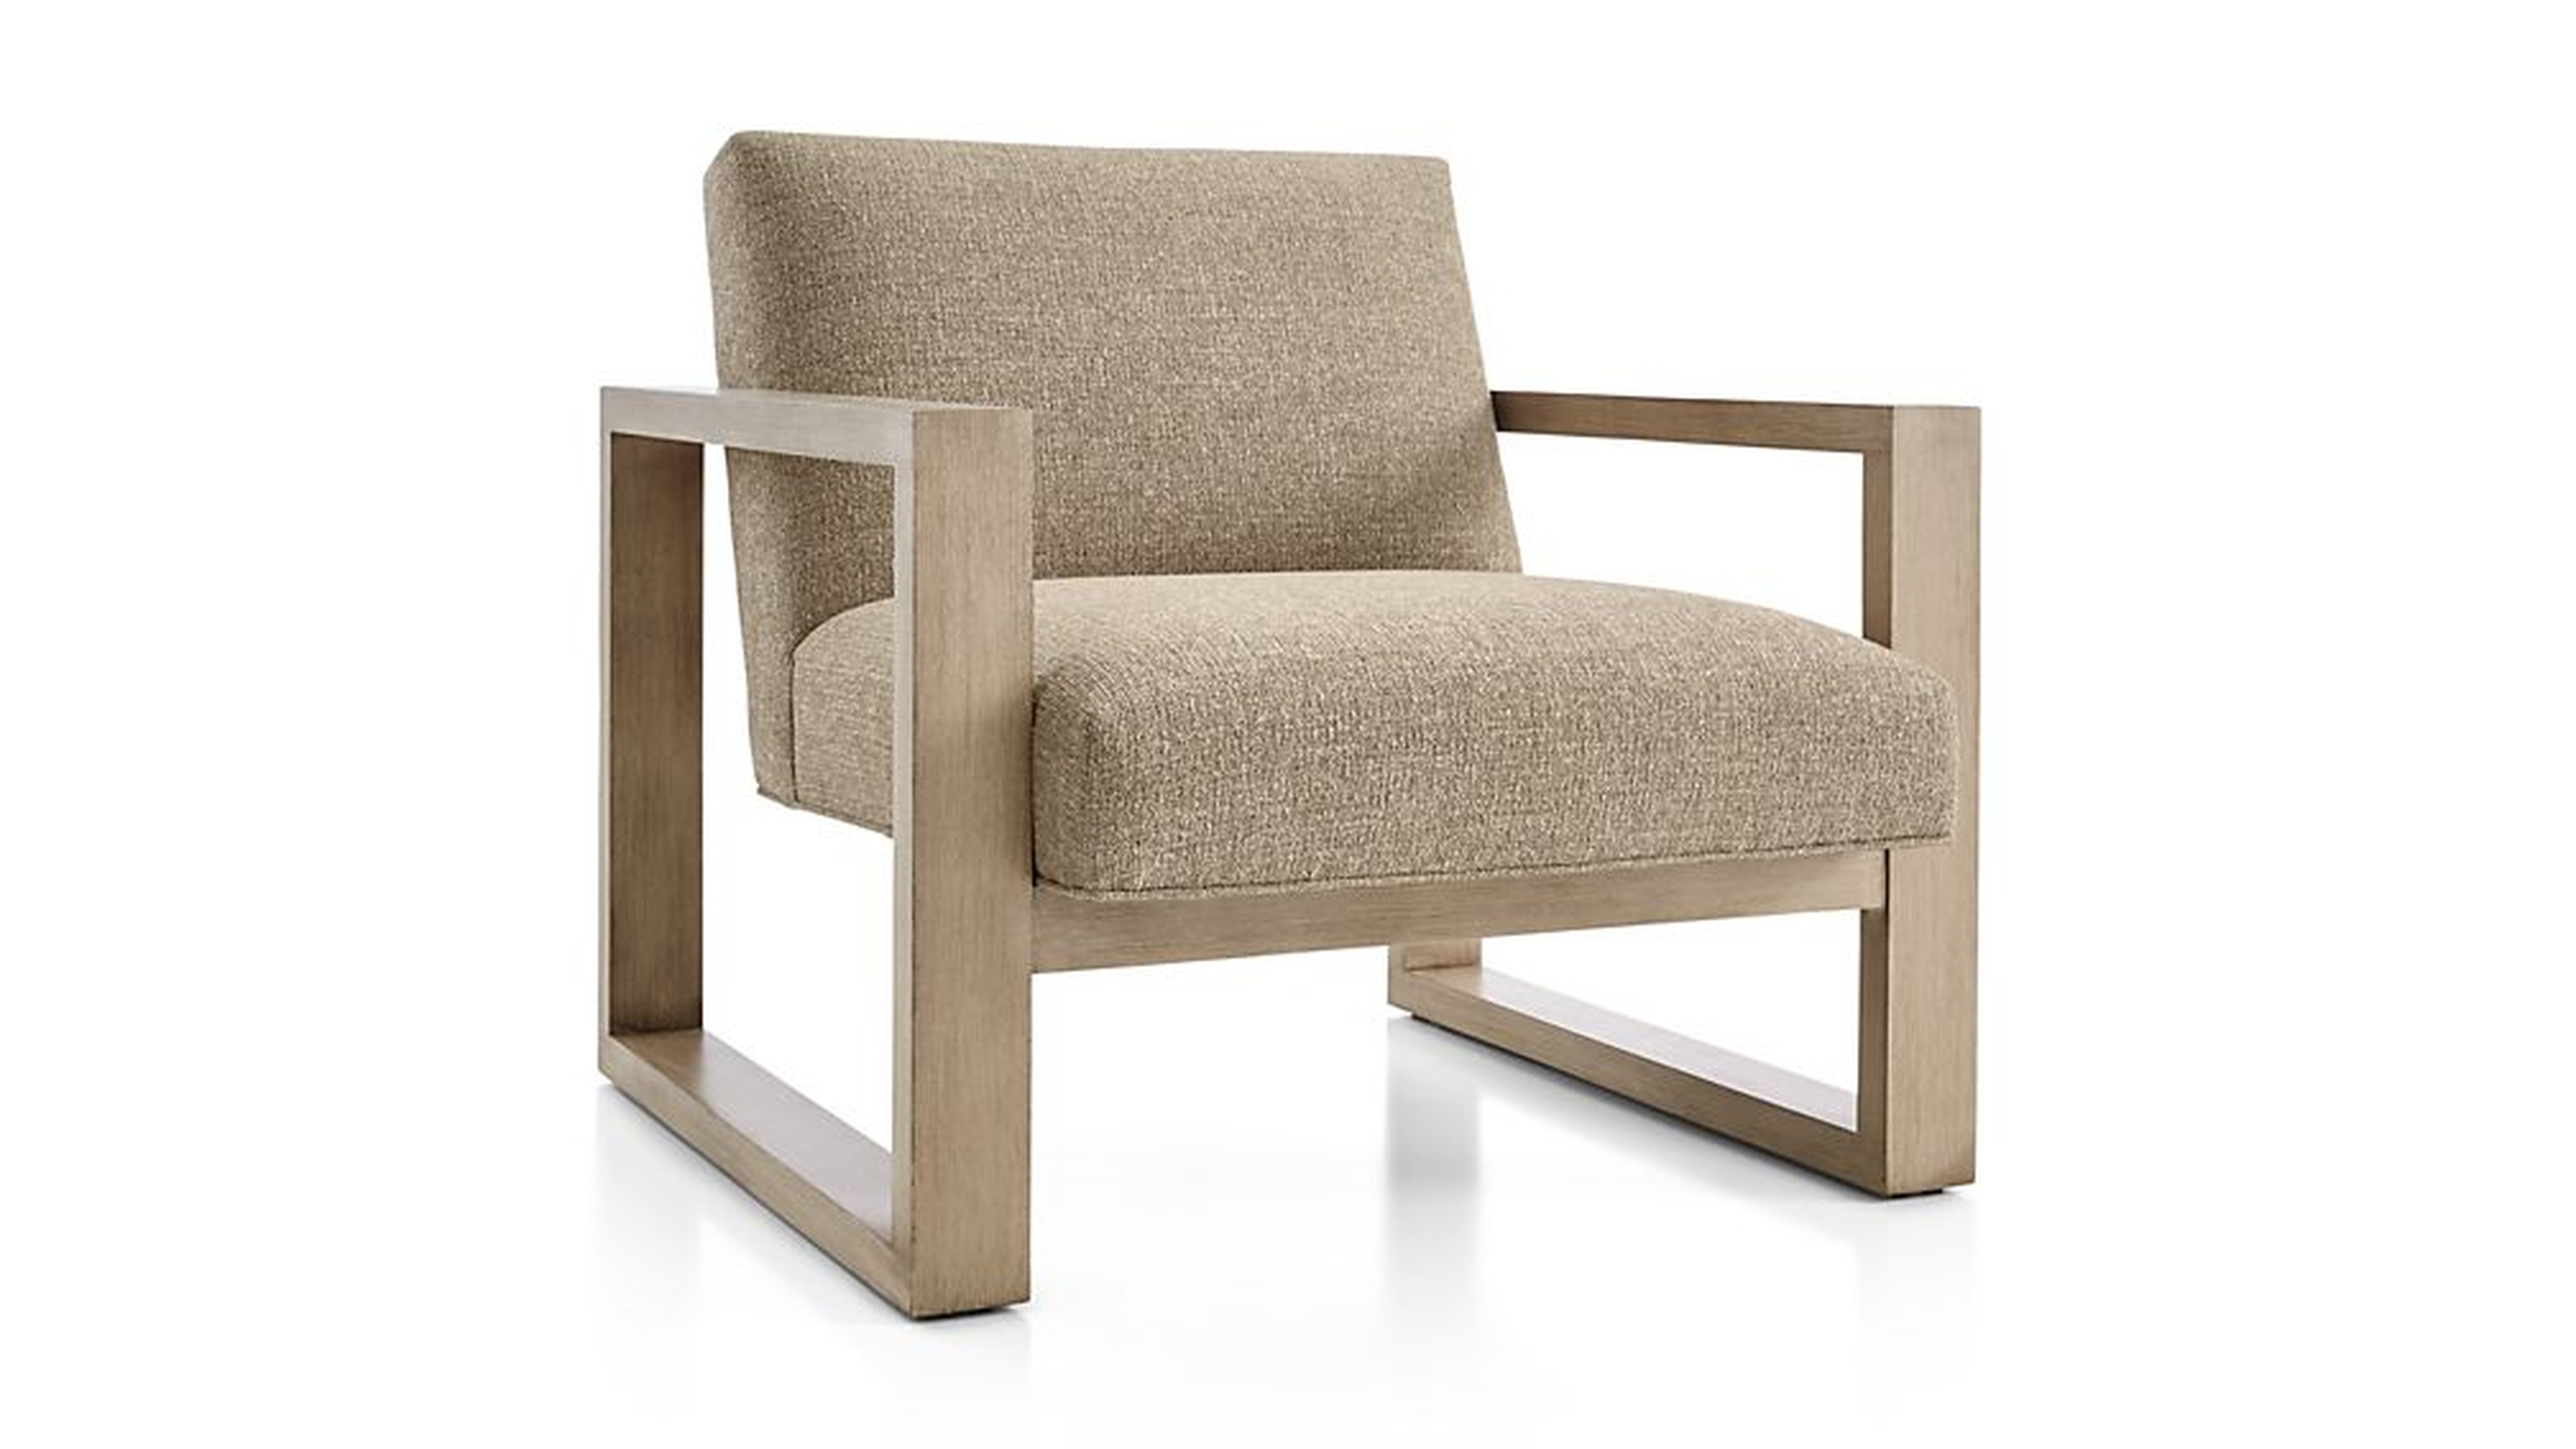 Dante Chair - Evere Hopsack fabric, Shale leg - Crate and Barrel